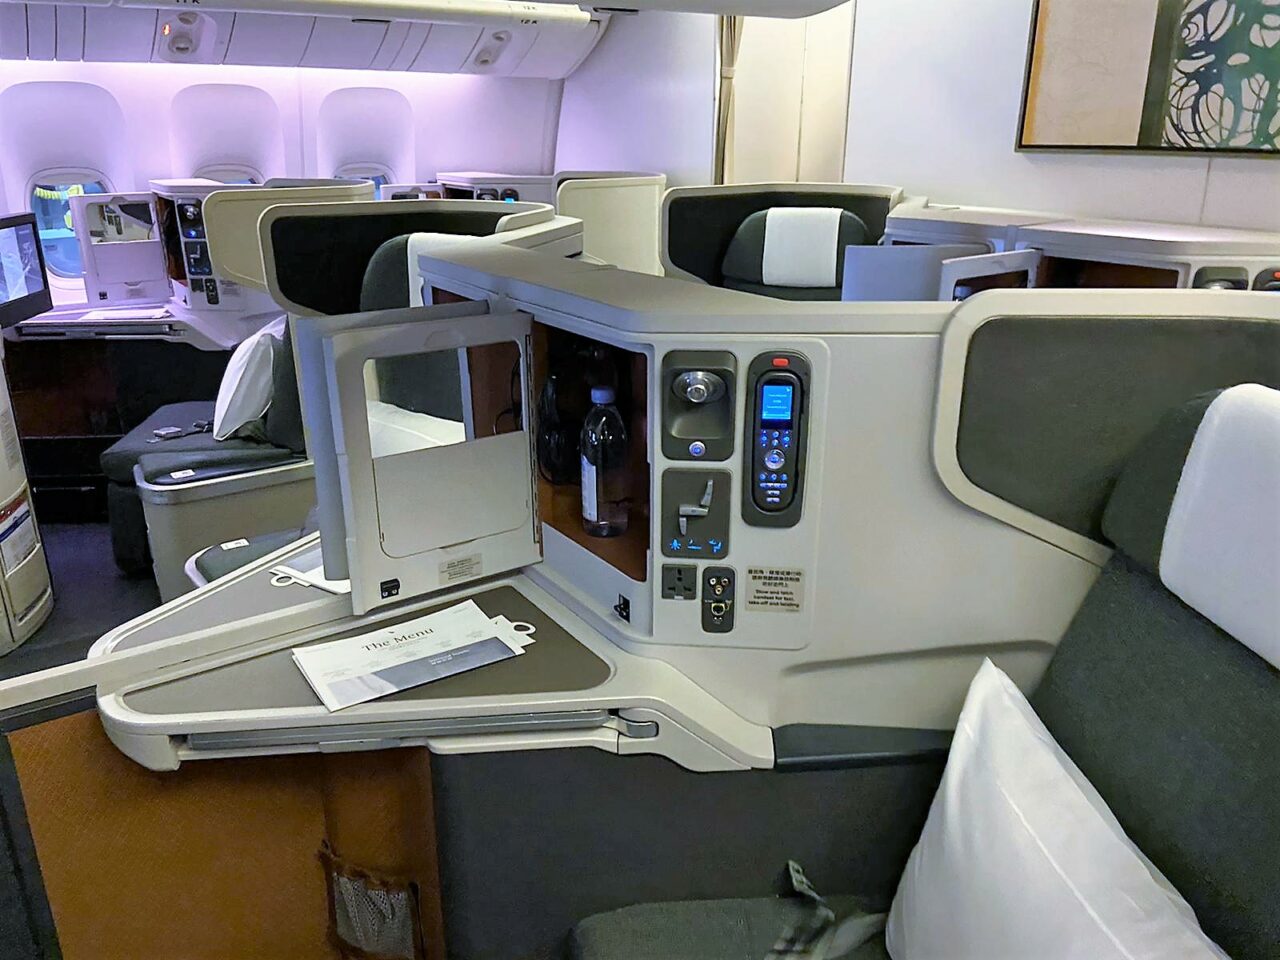 Cathay Pacific Business Class cabin